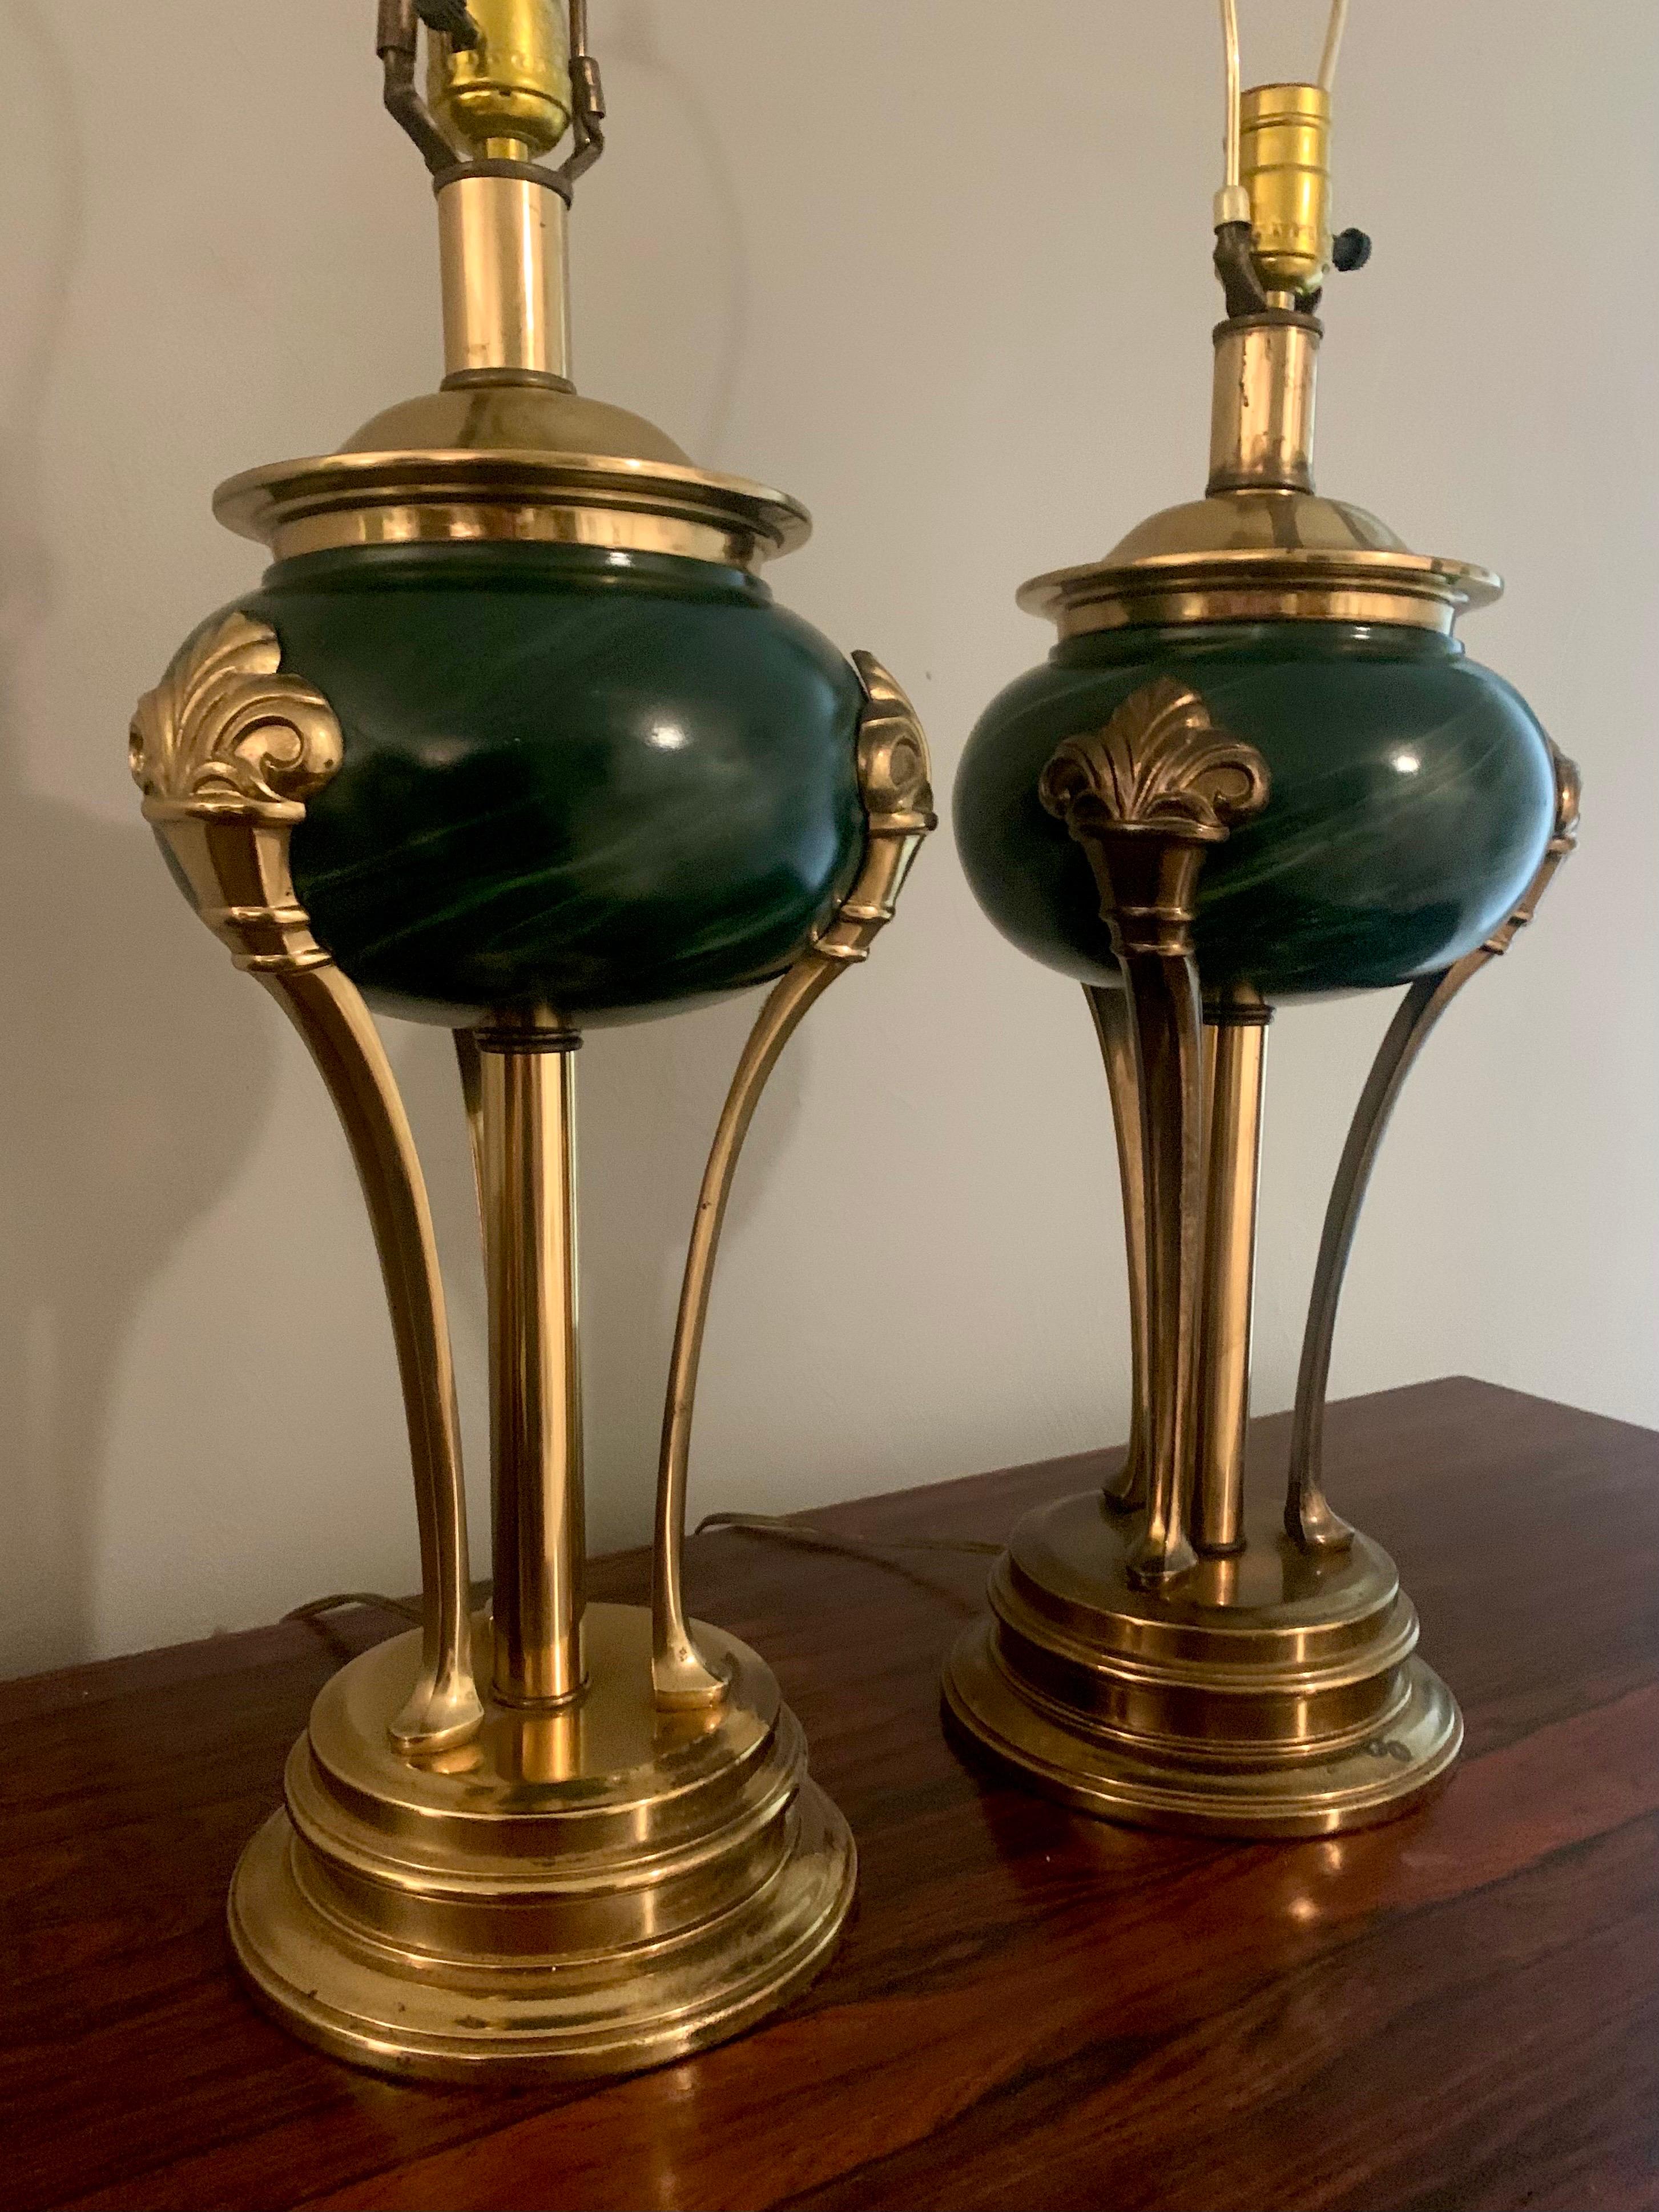 Neoclassical Revival 20th Century Empire Neoclassical Style Table Lamps in Green Stone and Brass For Sale